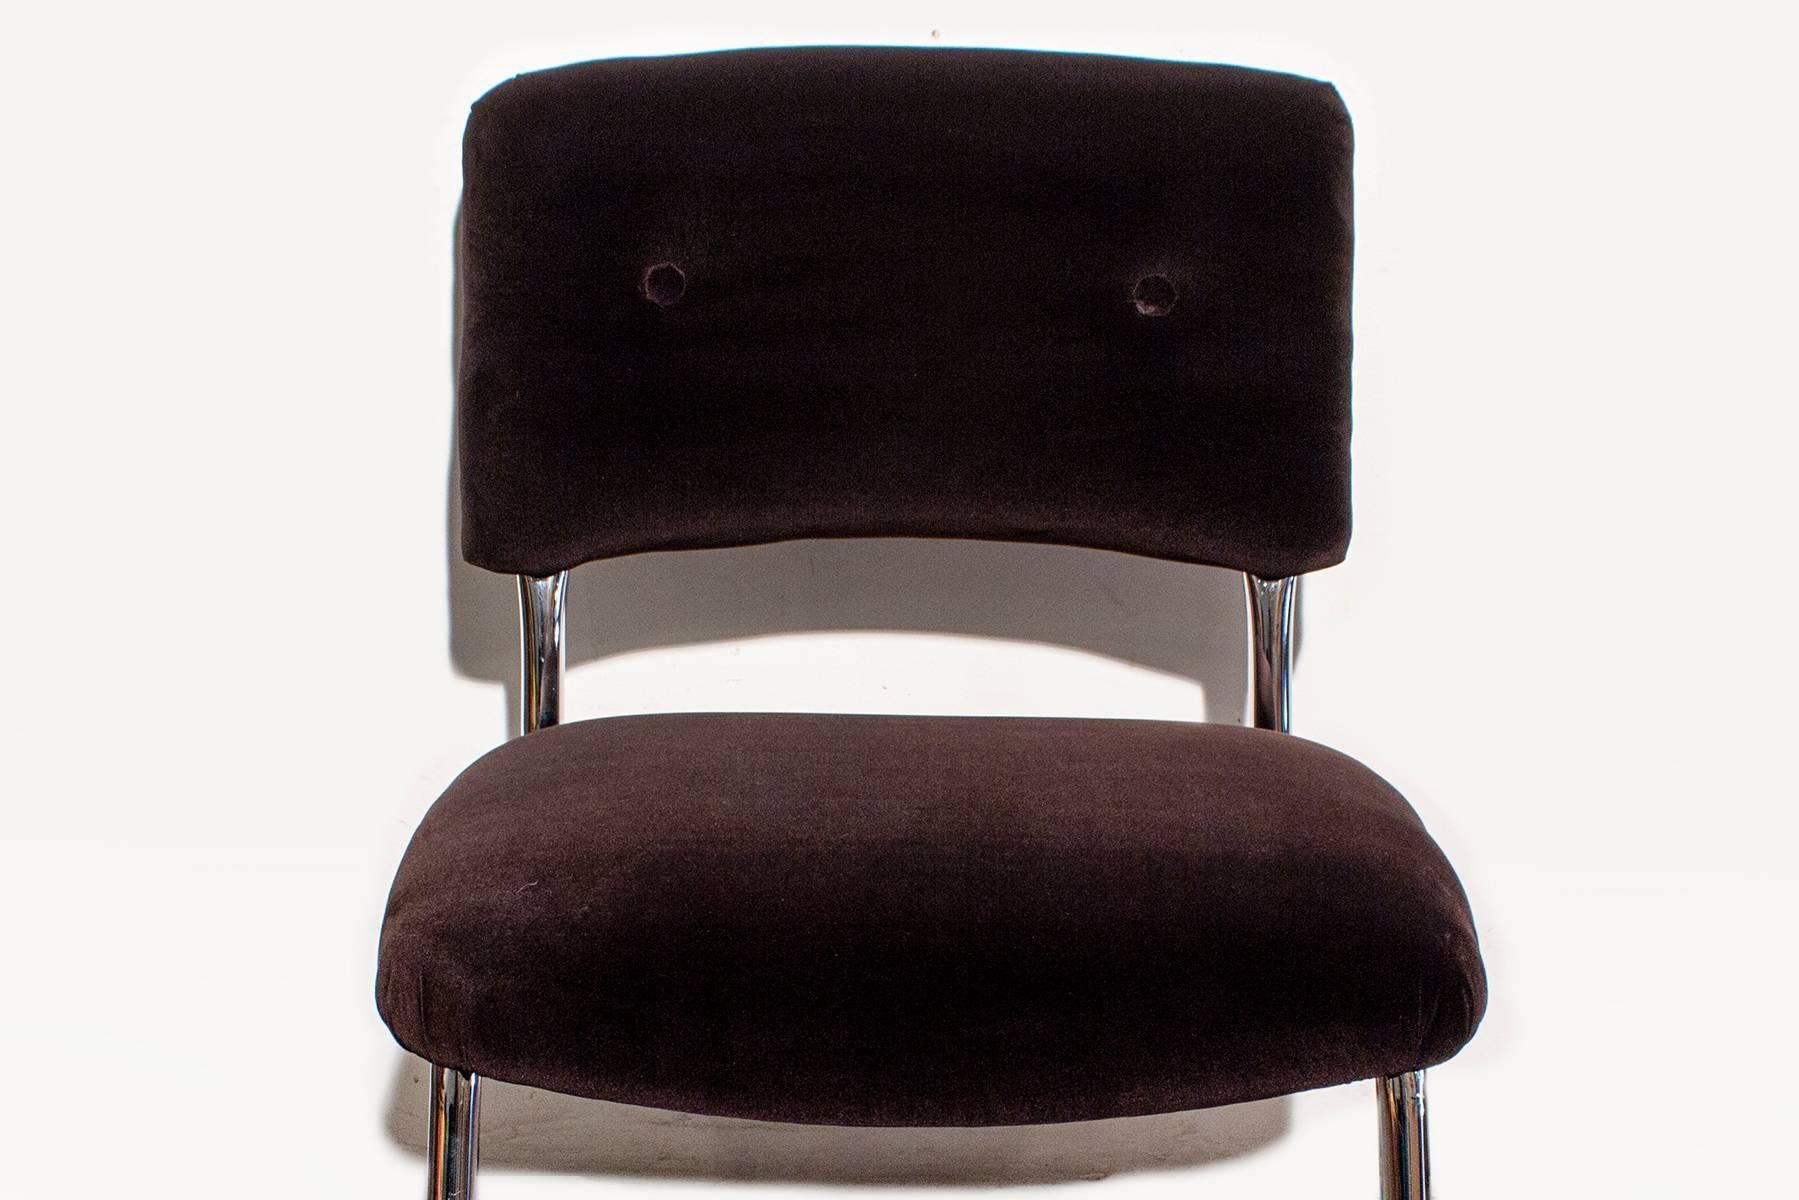 Classic steelcase chrome cantilever side chair from the 1980s. Reupholstered in a soft micro velvet. Matching armchair also available.

Dimensions: 19" D x 21" W x 31" H.
18" seat height.